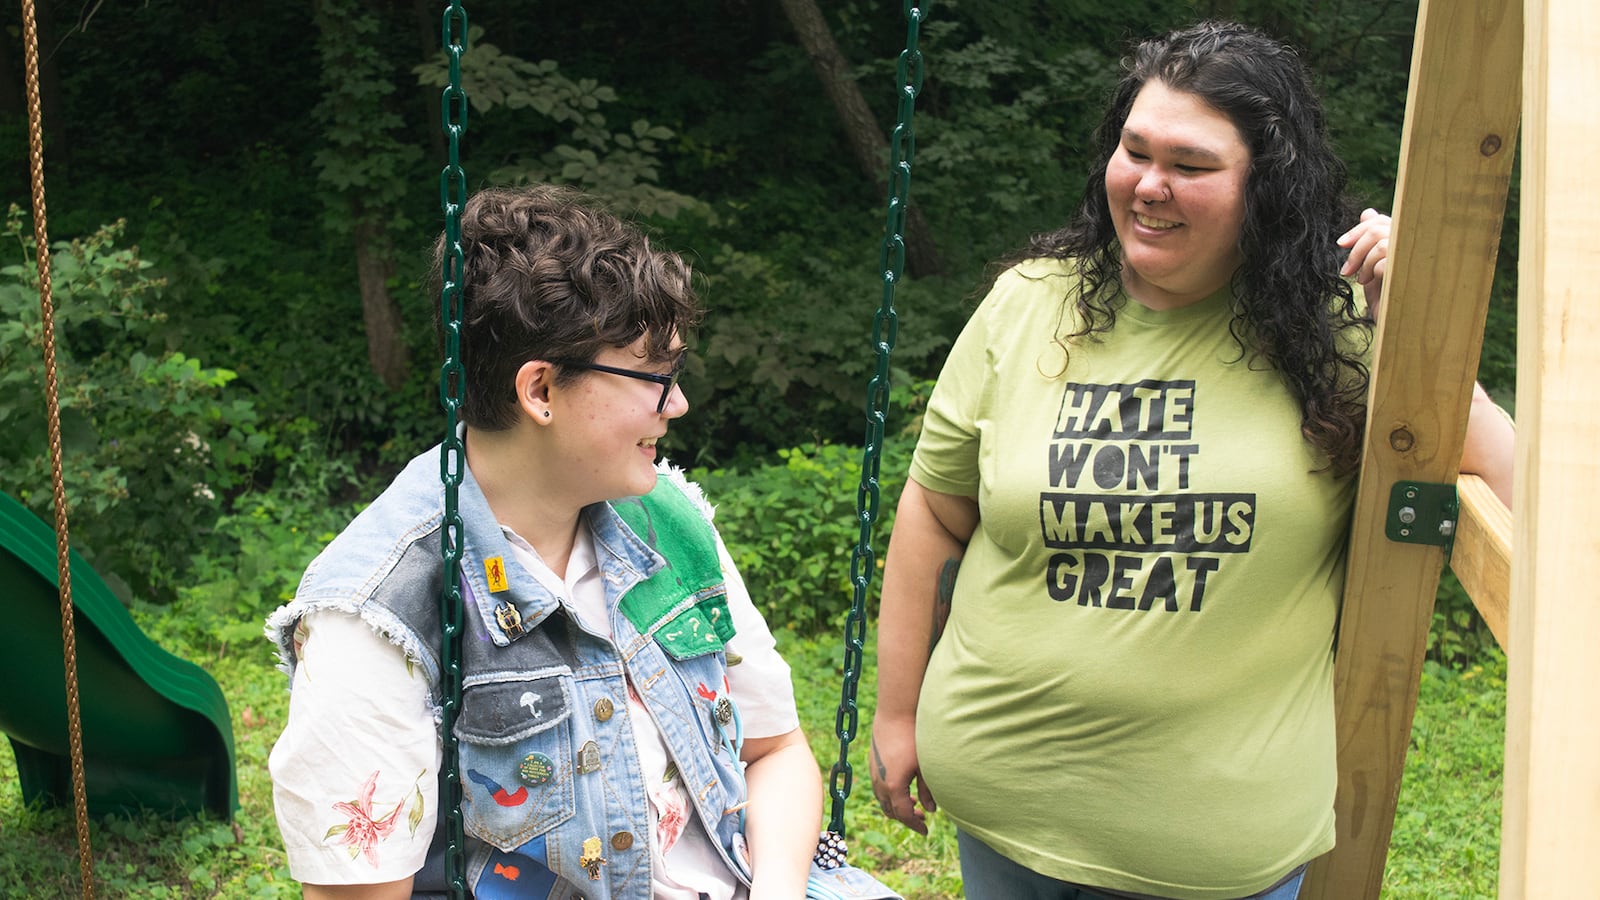 A youth in jeans and a jeans vest sits on a swing next to a person in a yellowish t-shirt that reads “Hate won’t make us great.”